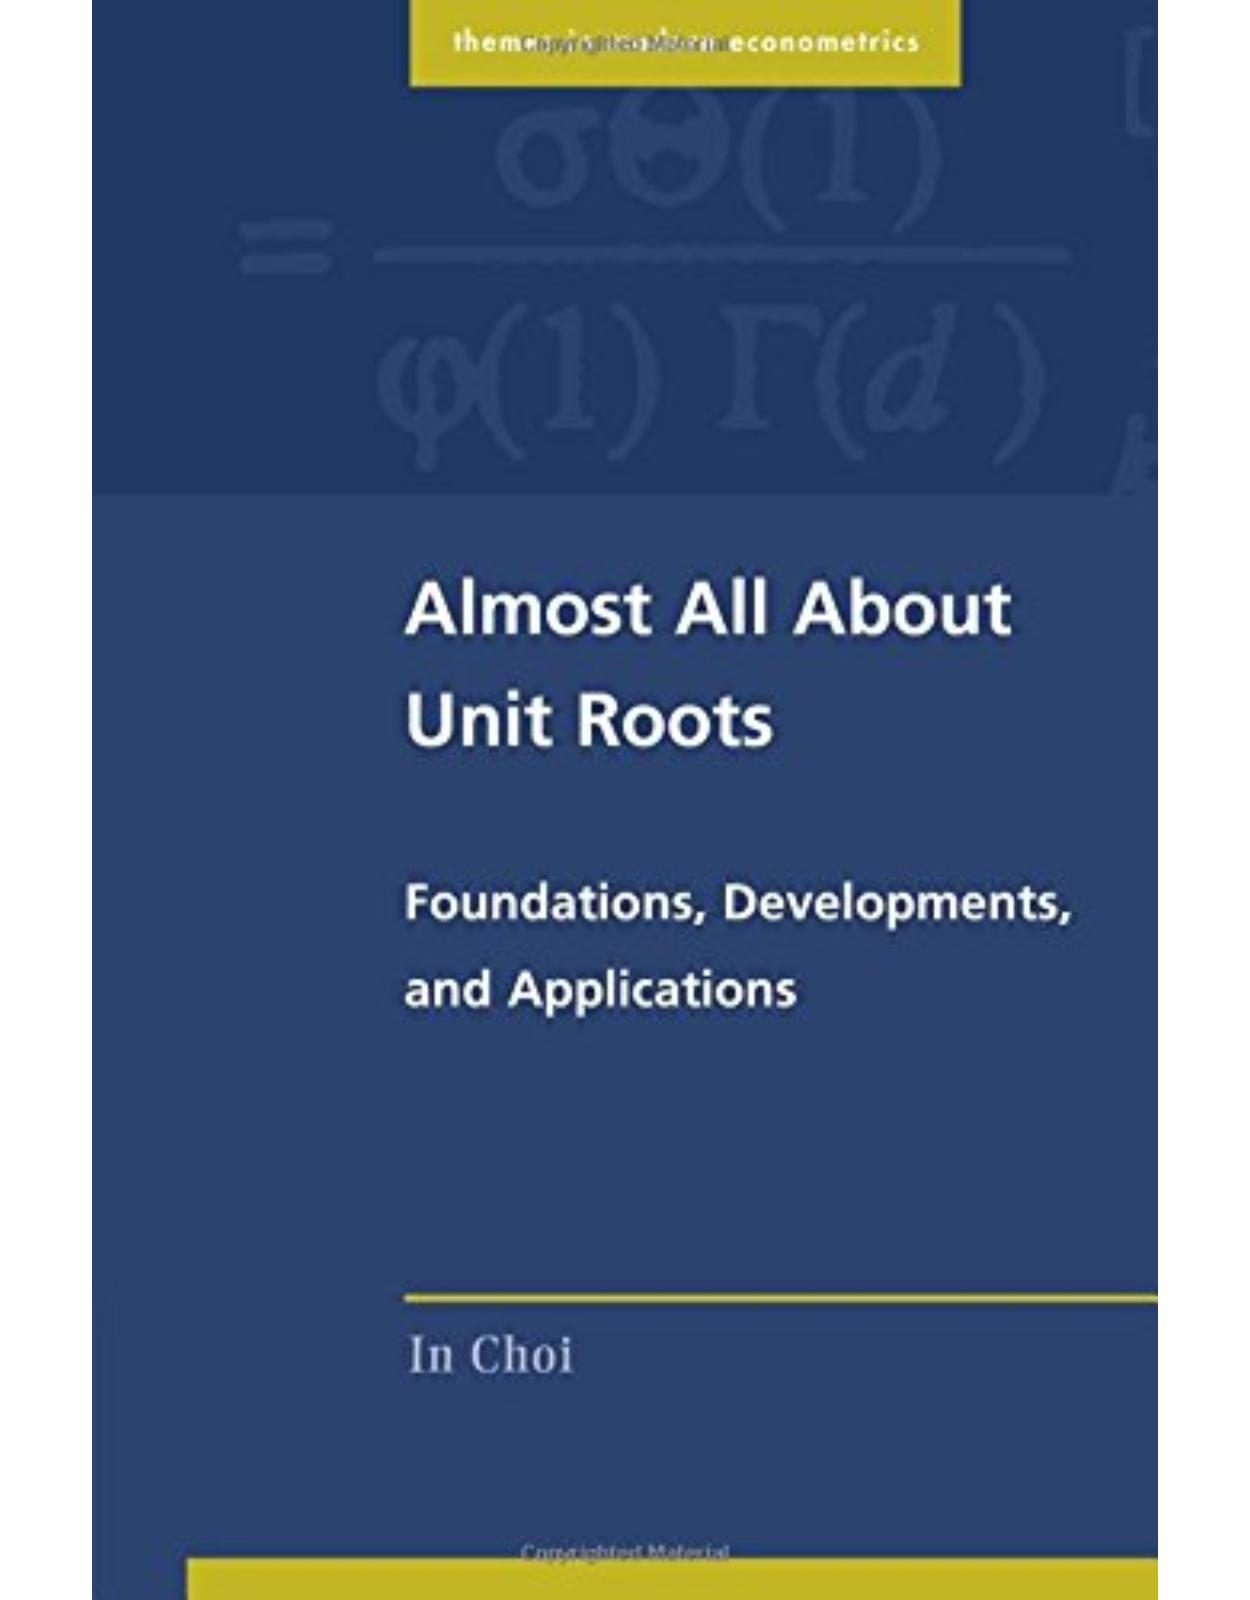 Almost All About Unit Roots: Foundations, Developments, and Applications (Themes in Modern Econometrics) 